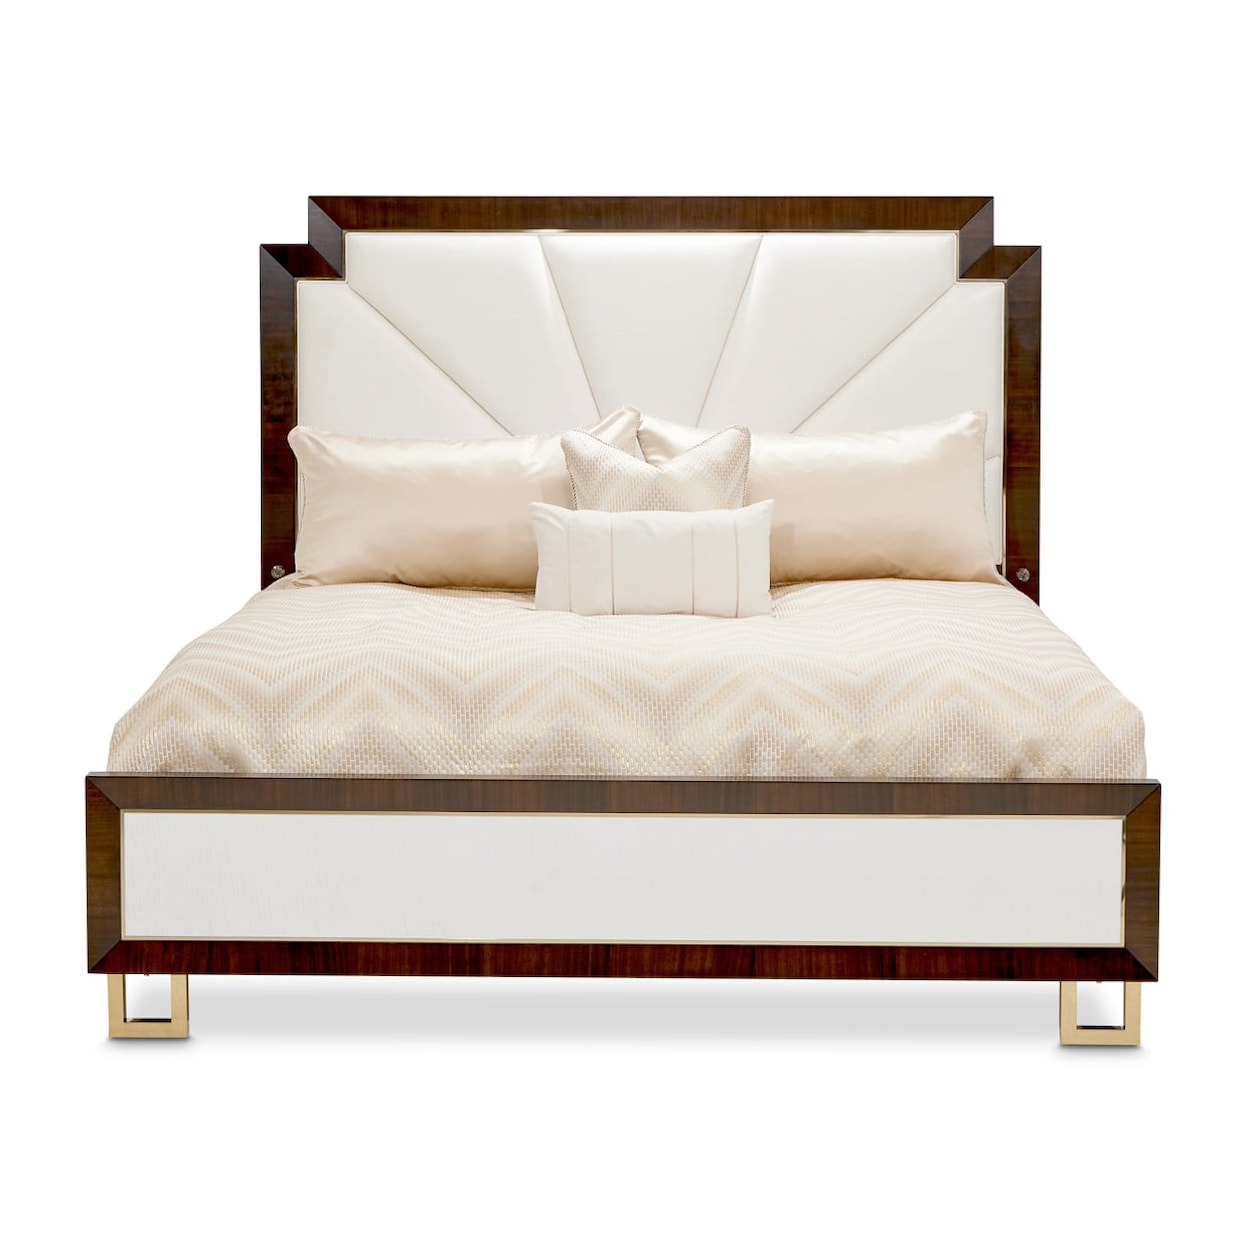 Michael Amini Belmont Place Upholstered Queen Bed